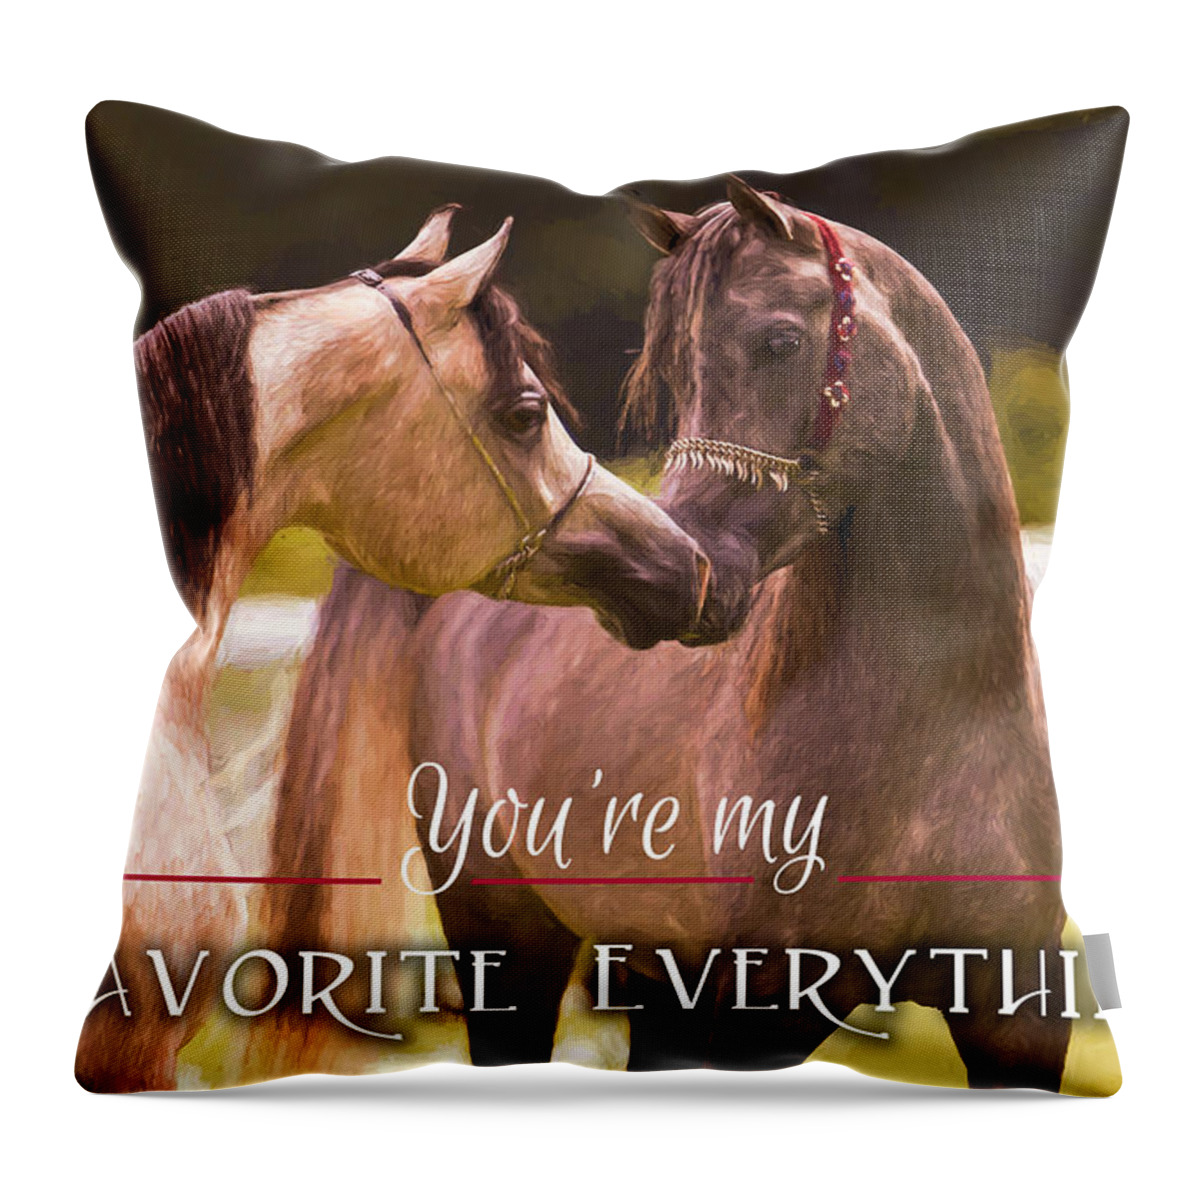 Nuzzling Horses Throw Pillow featuring the digital art Horses My Everything by Steve Ladner